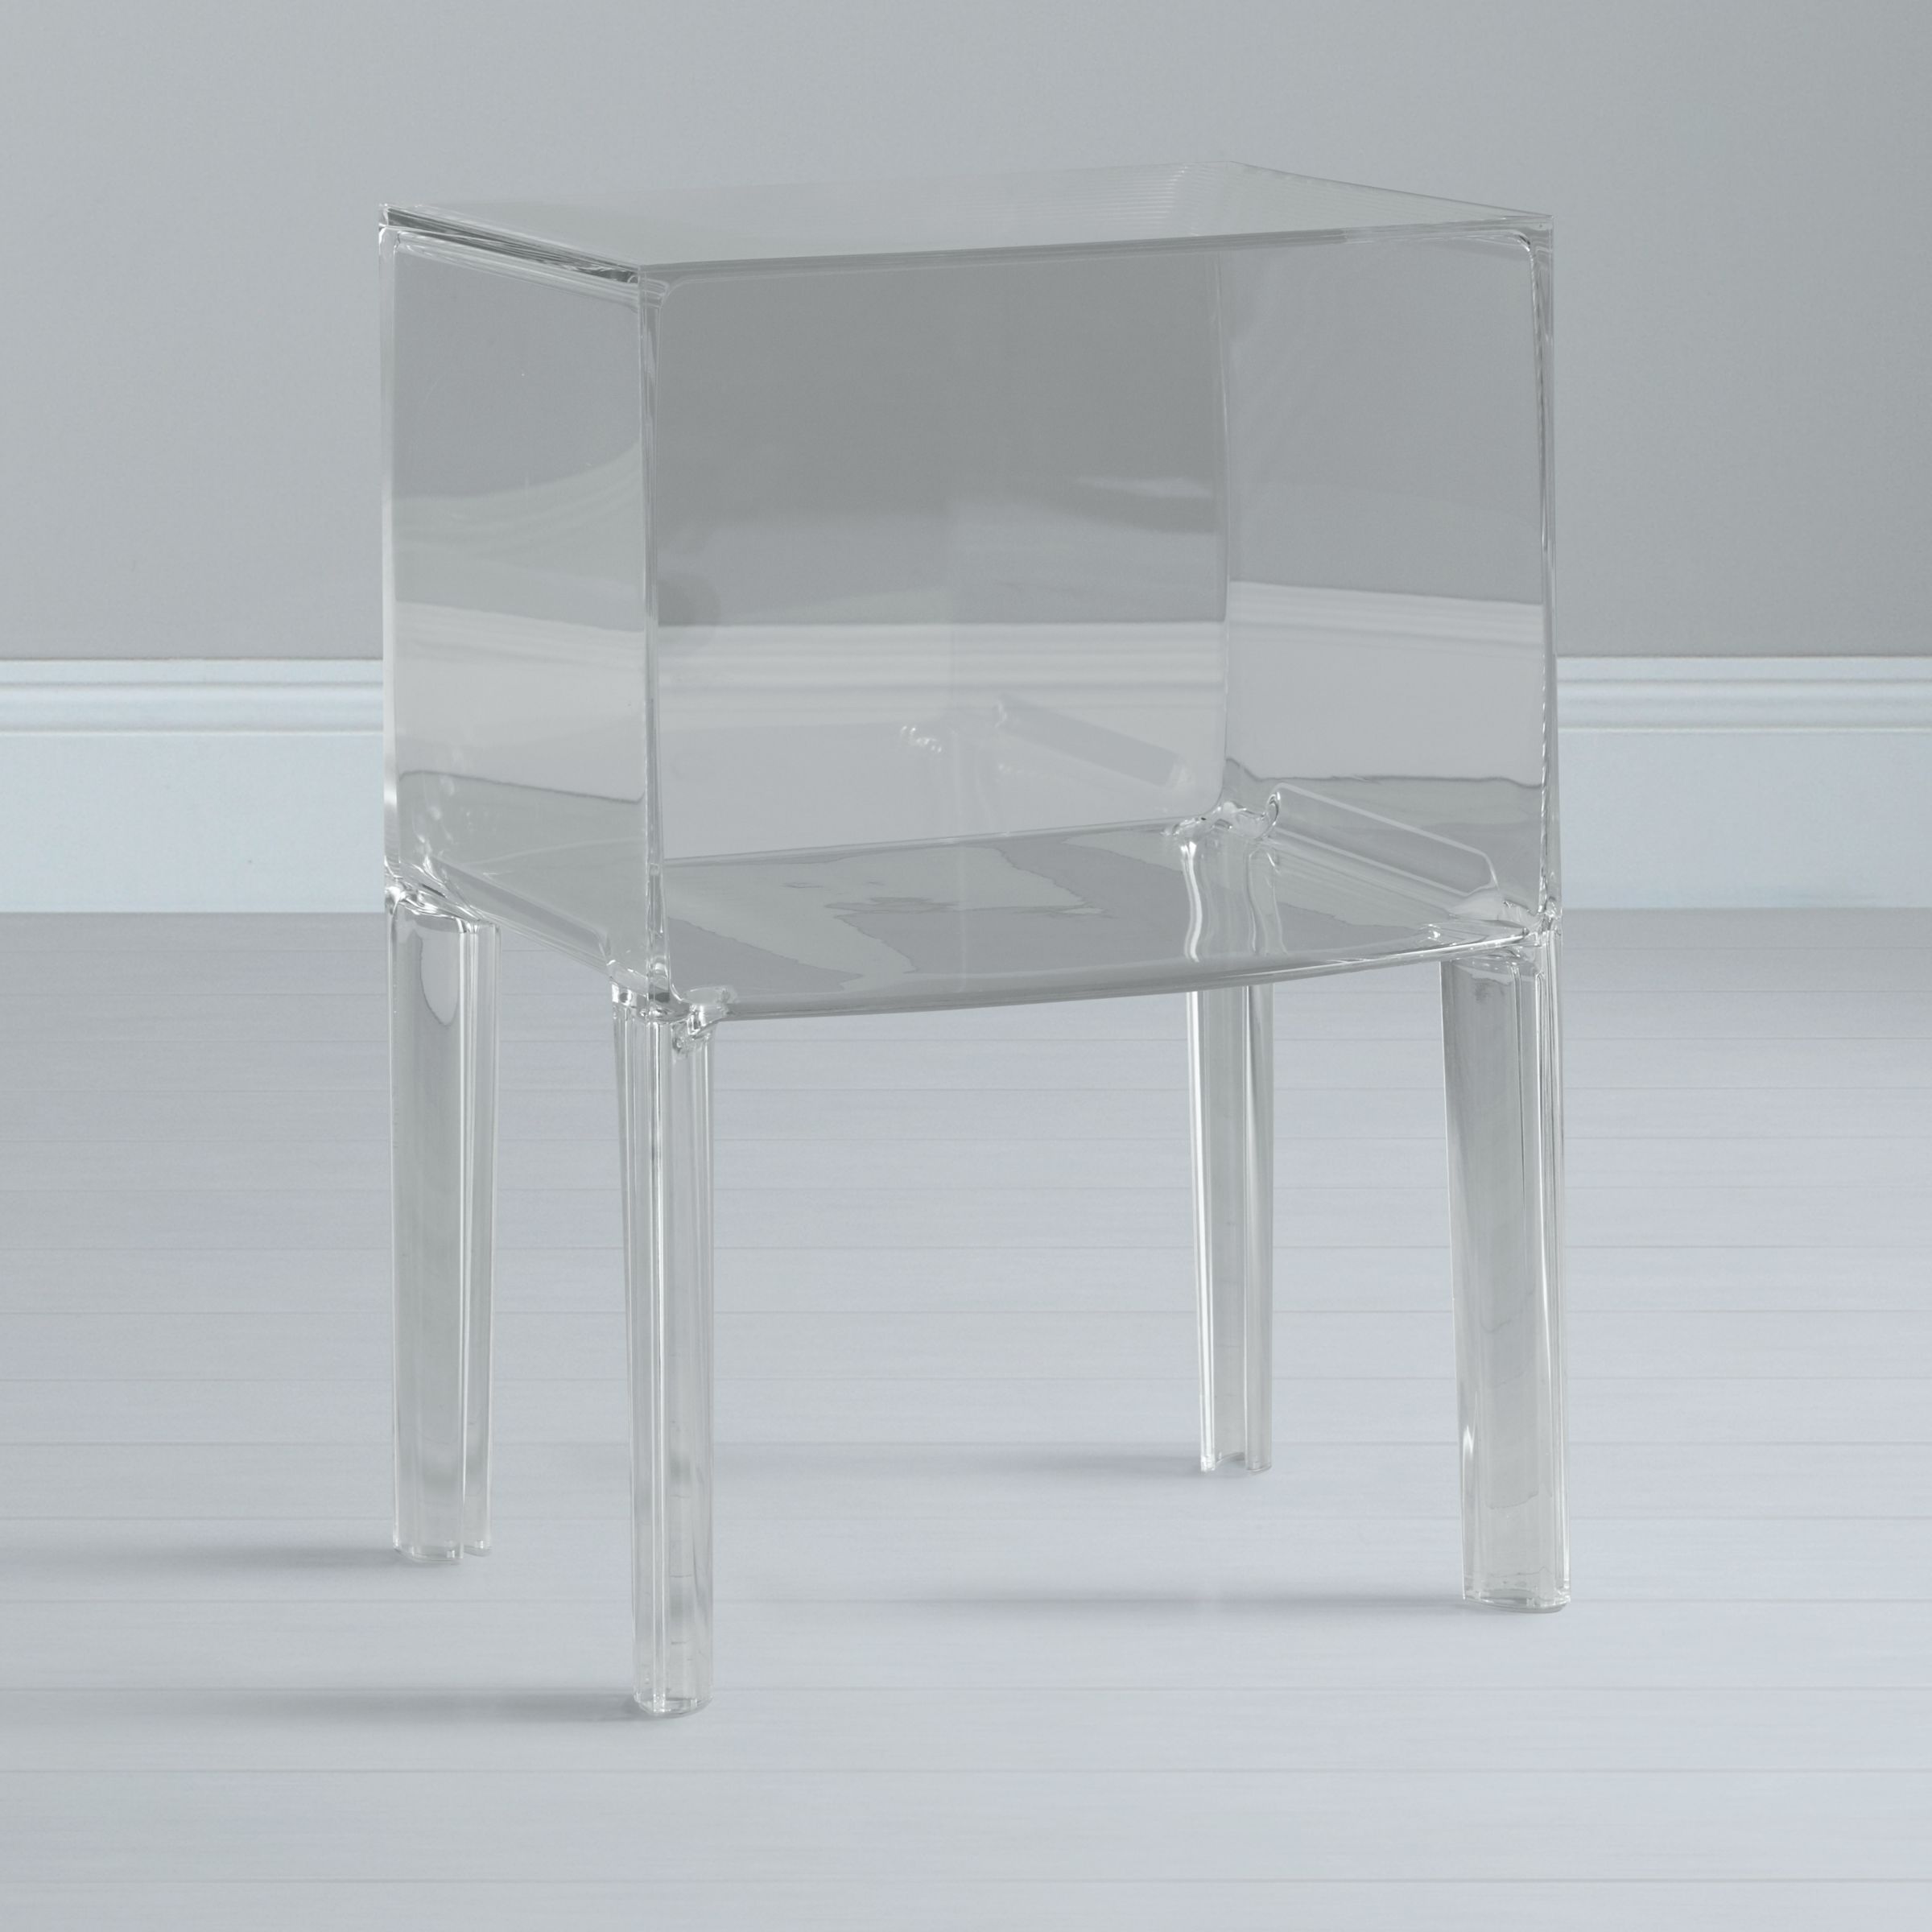 Philippe Starck for Kartell Ghost Buster Night Table, Crystal, Small at John Lewis